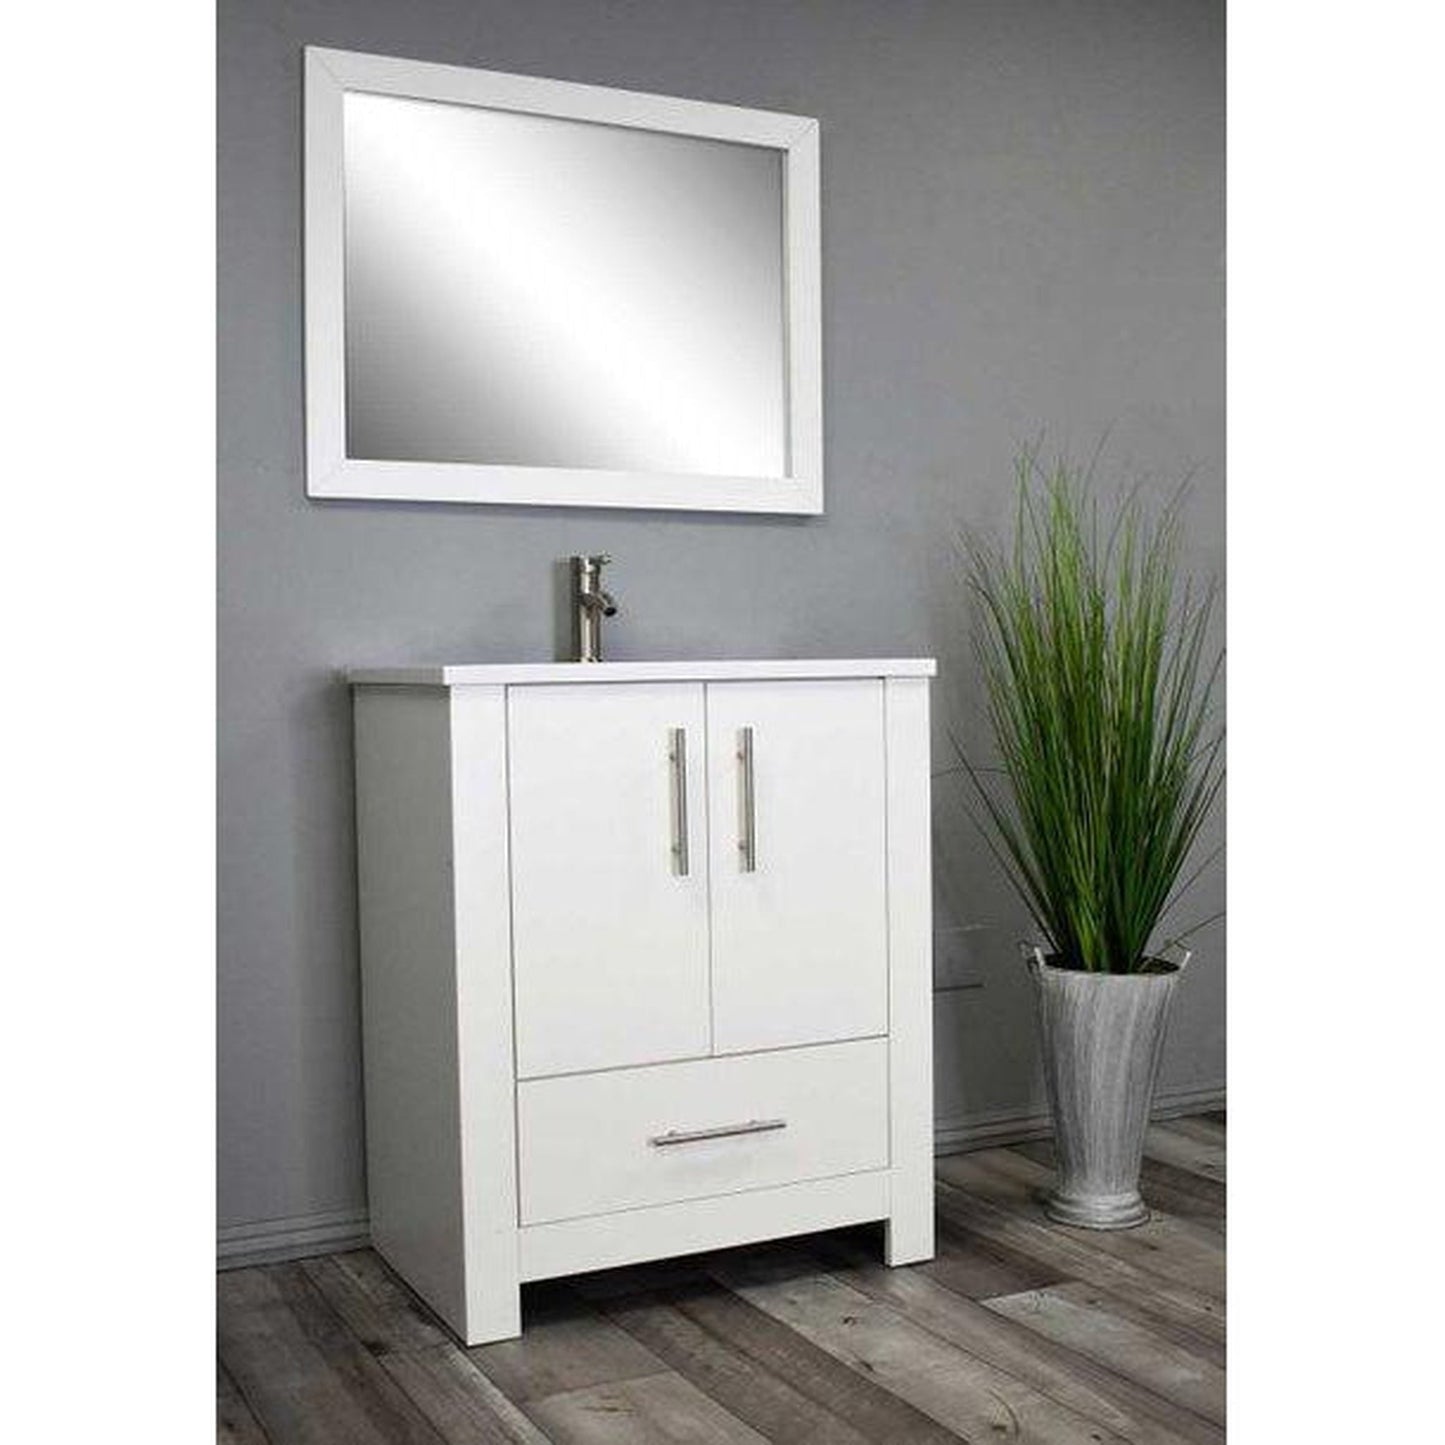 Volpa USA Boston 24" x 20" Glossy White Modern Freestanding Bathroom Vanity With Acrylic Top, Integrated Acrylic Sink And Brushed Nickel Handles